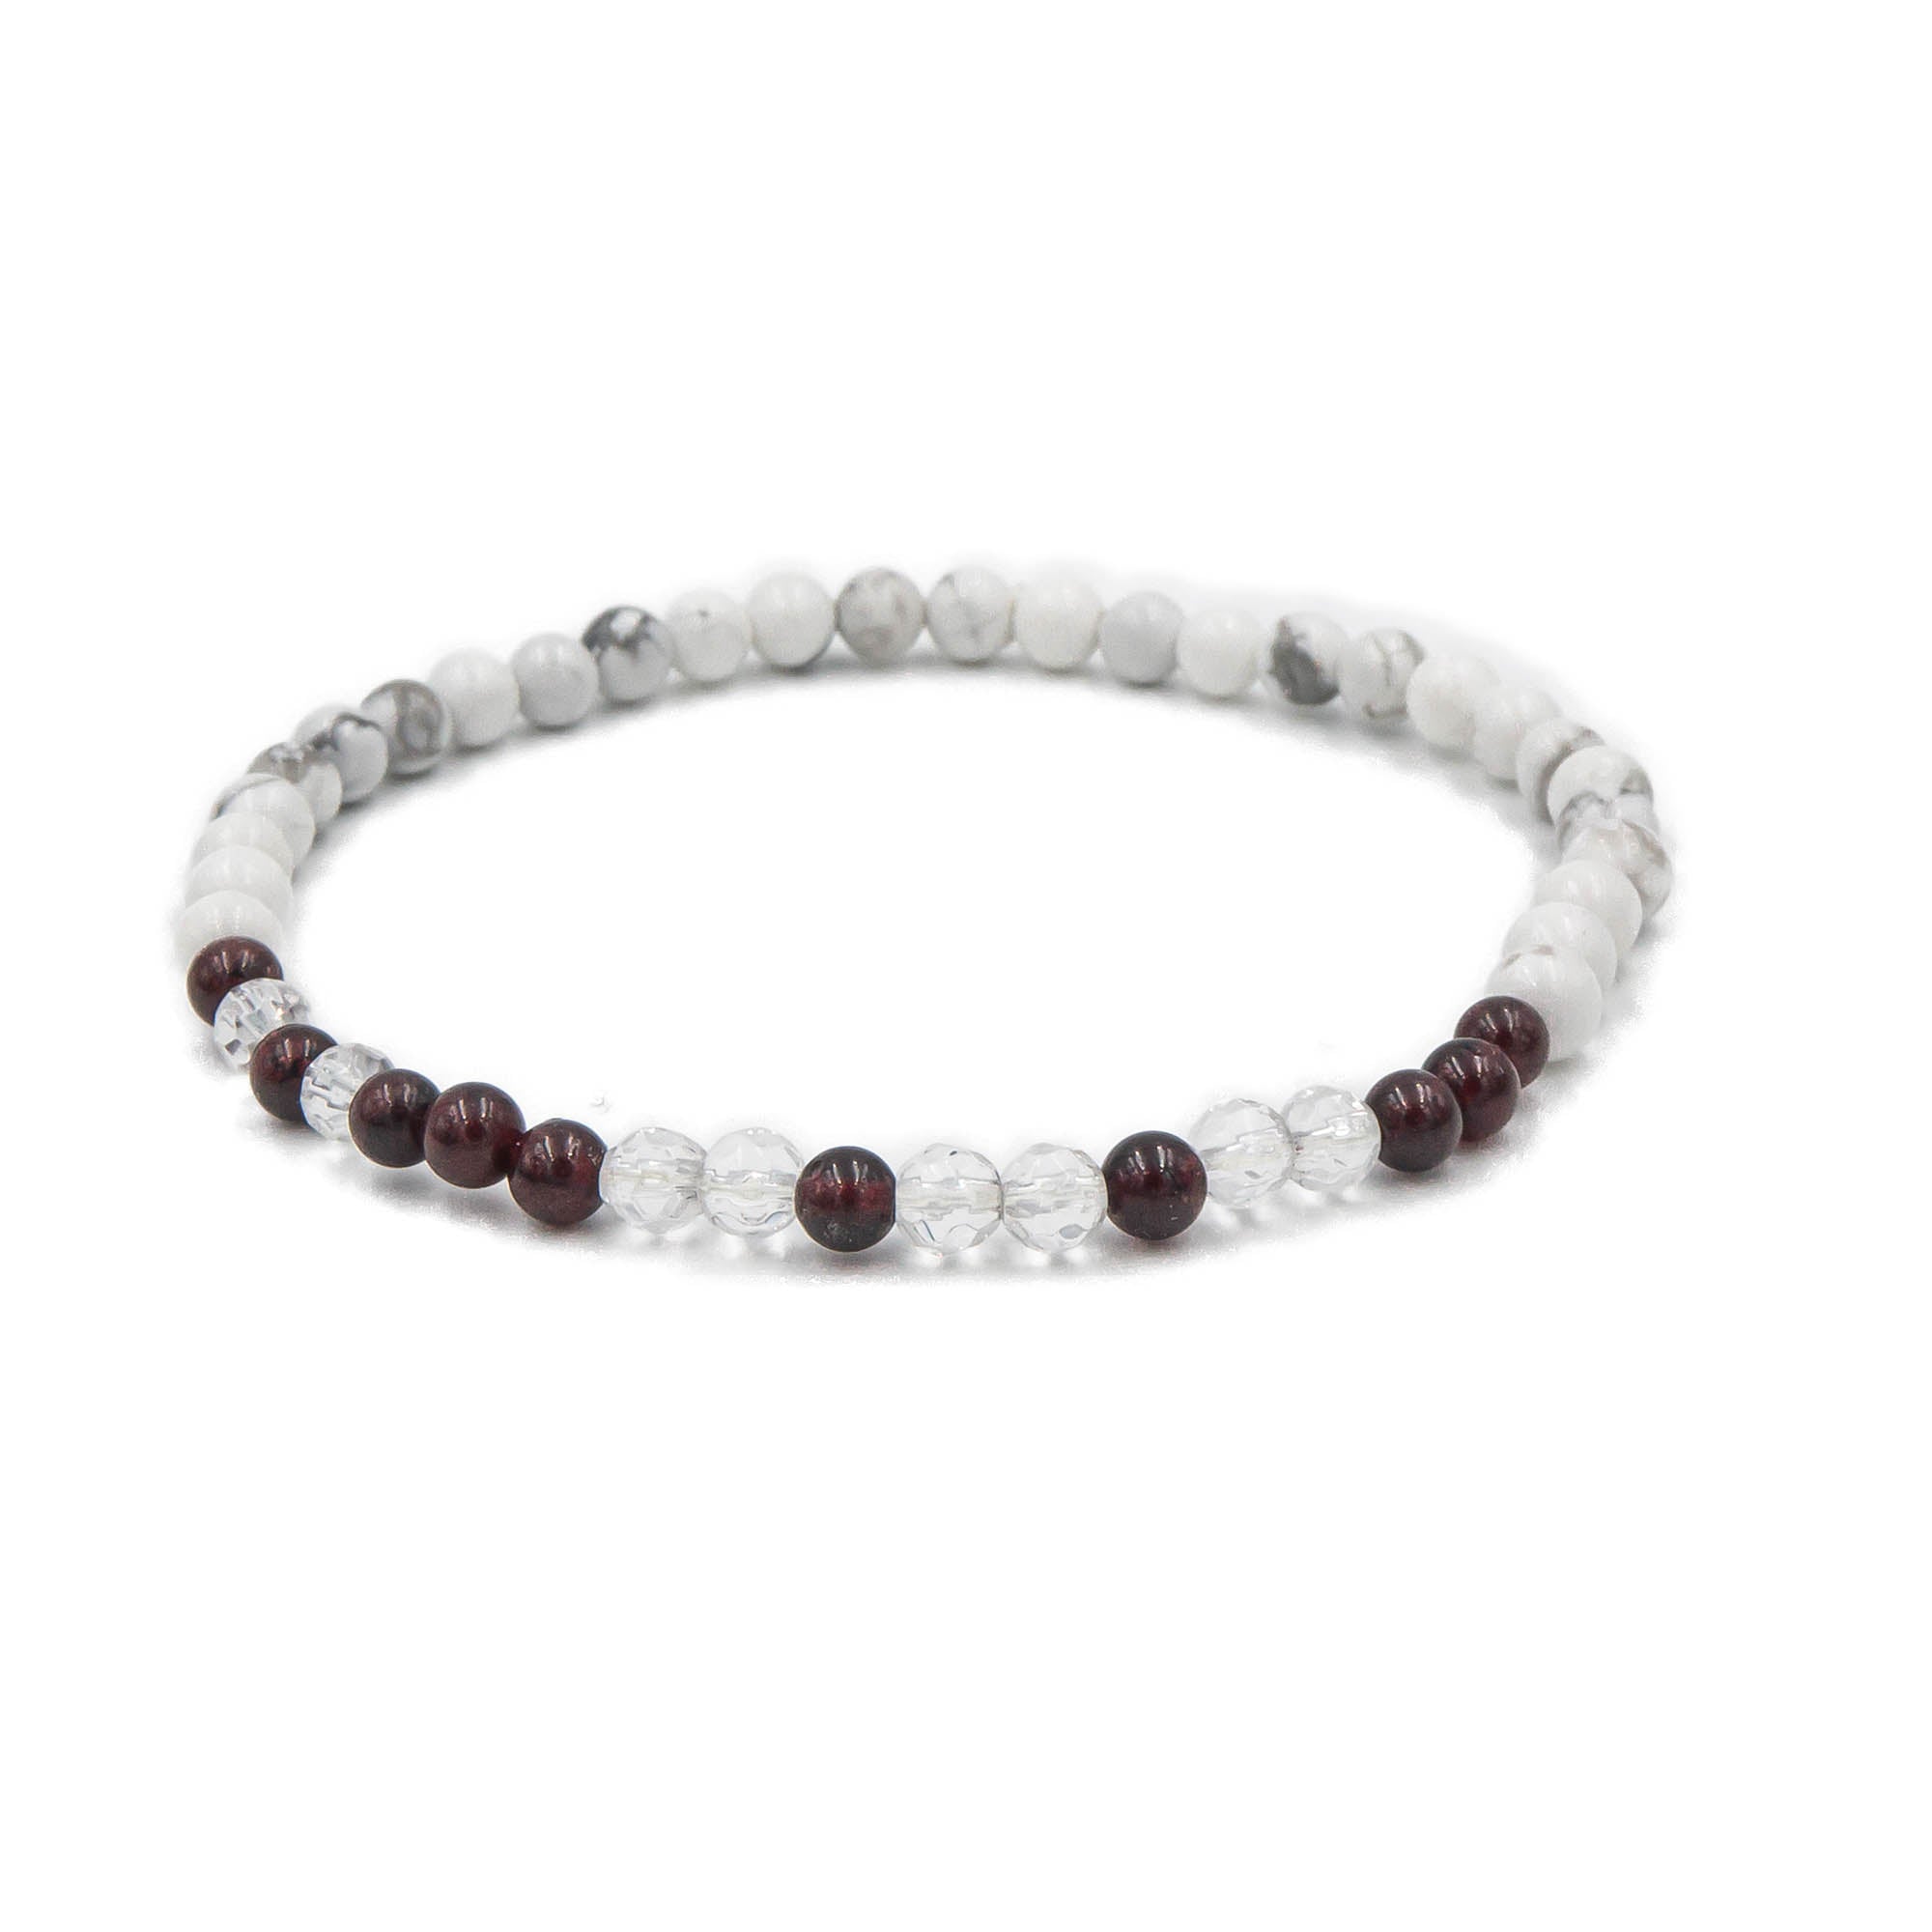 ALWAYS Morse code bracelet Garnet & Howlite natural stone for men, women and couples from Earth Song Jewelry